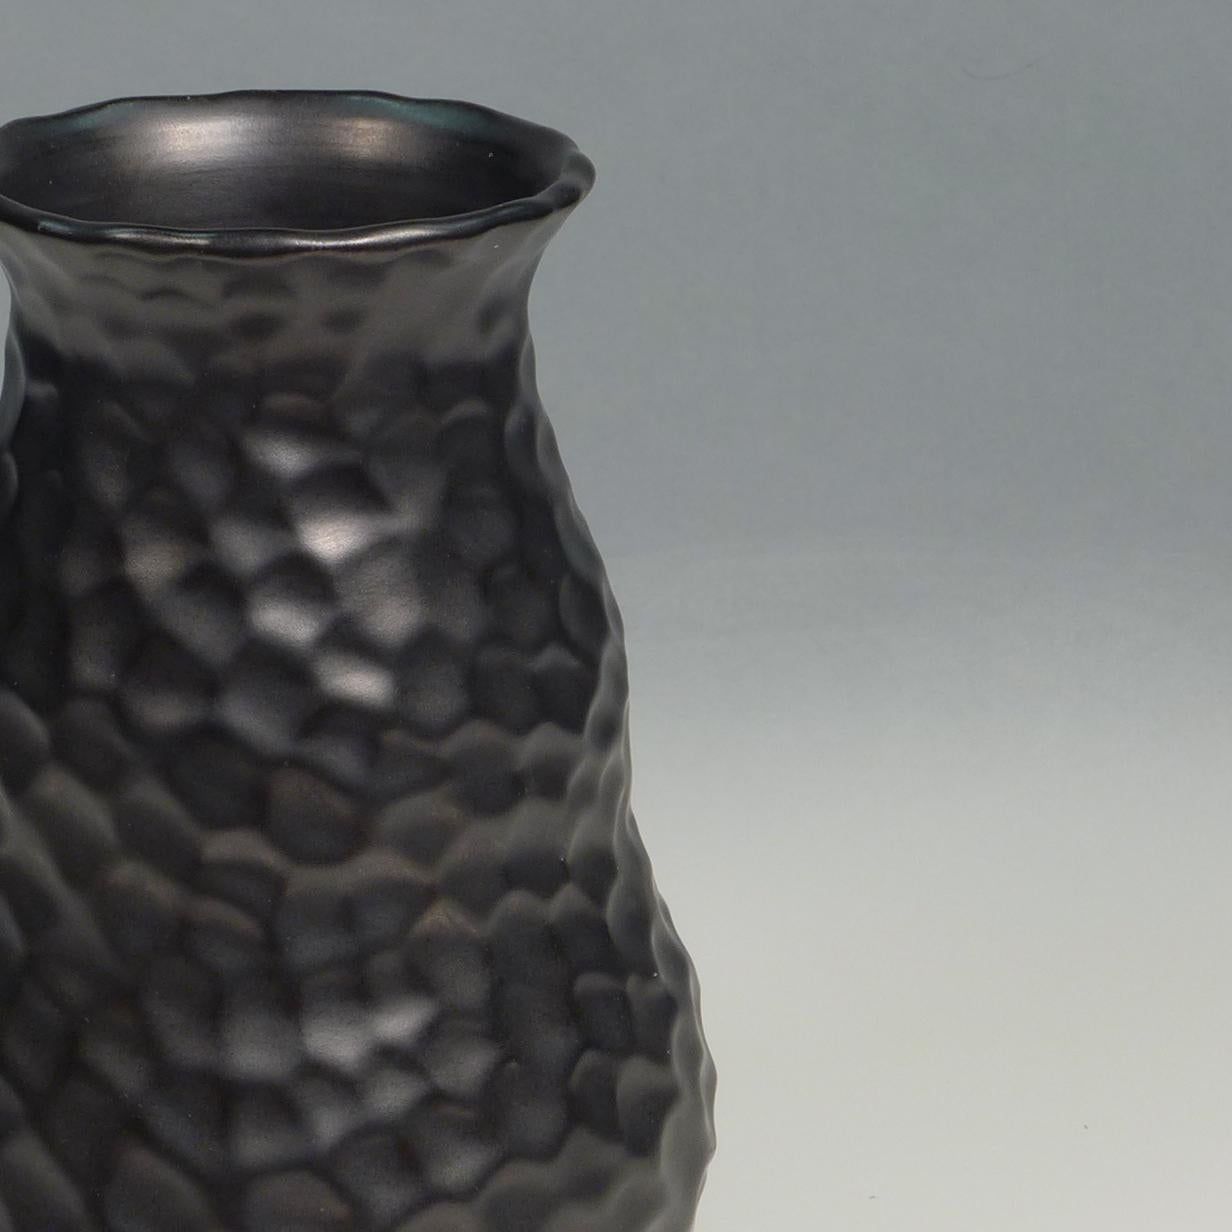 Elegant dimple vase designed by Gerardus Klinkenberg and produced at the Katwijk factory in the Netherlands, circa 1920s
Materials: Ceramic stoneware with a smooth black matte glaze.